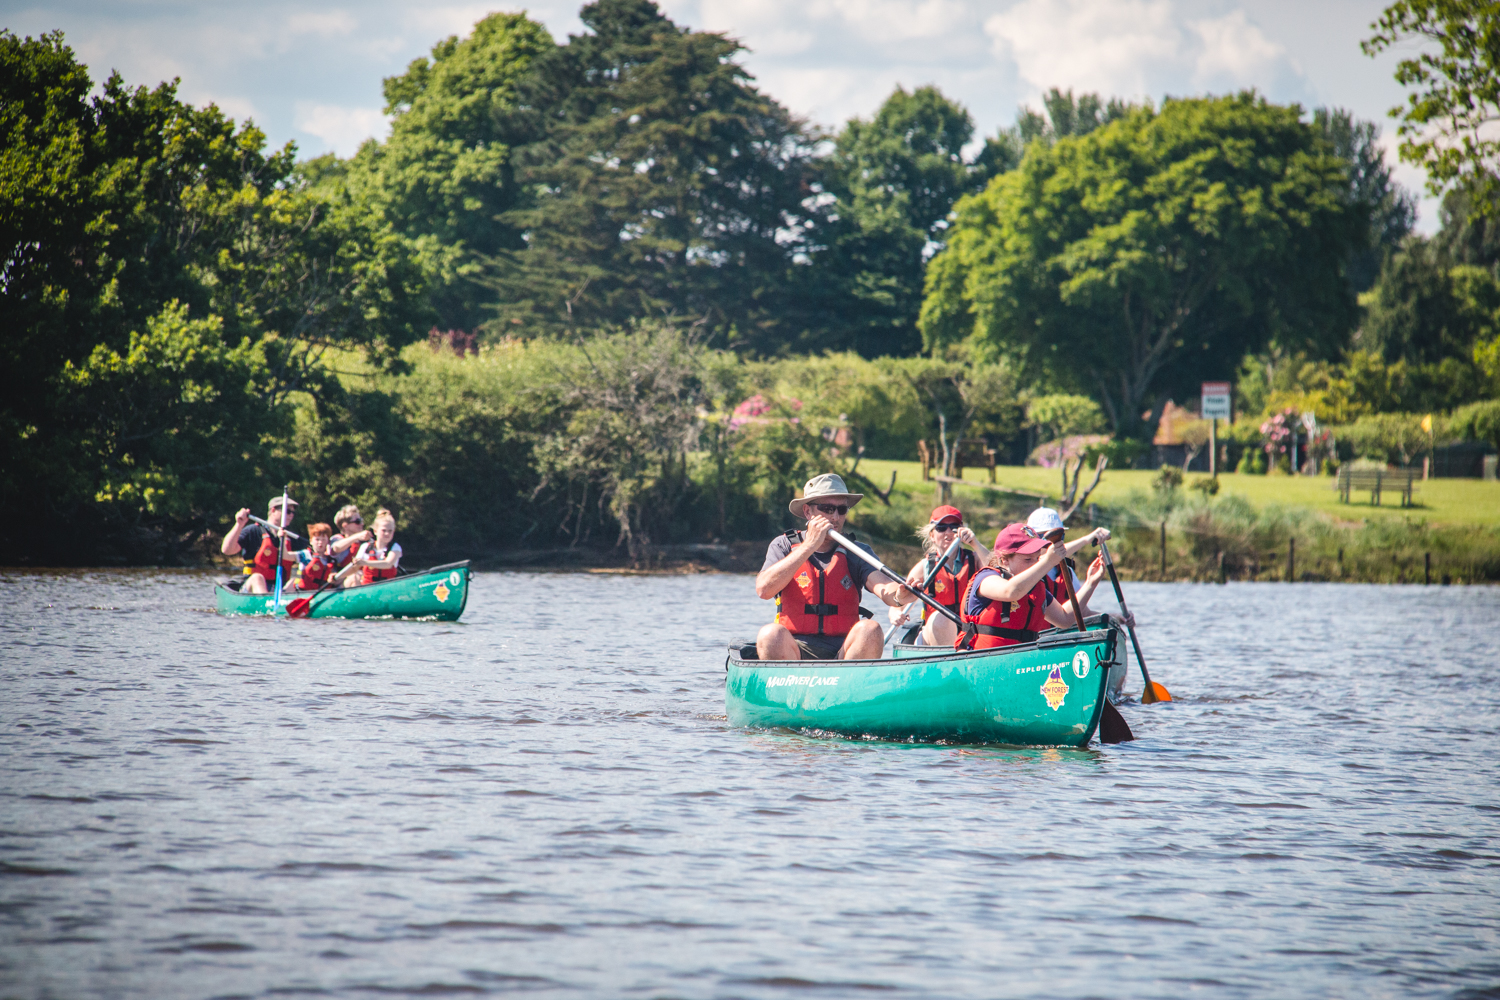 Whilst you're camping in the new forest, why not enjoy some fun outdoor activities?